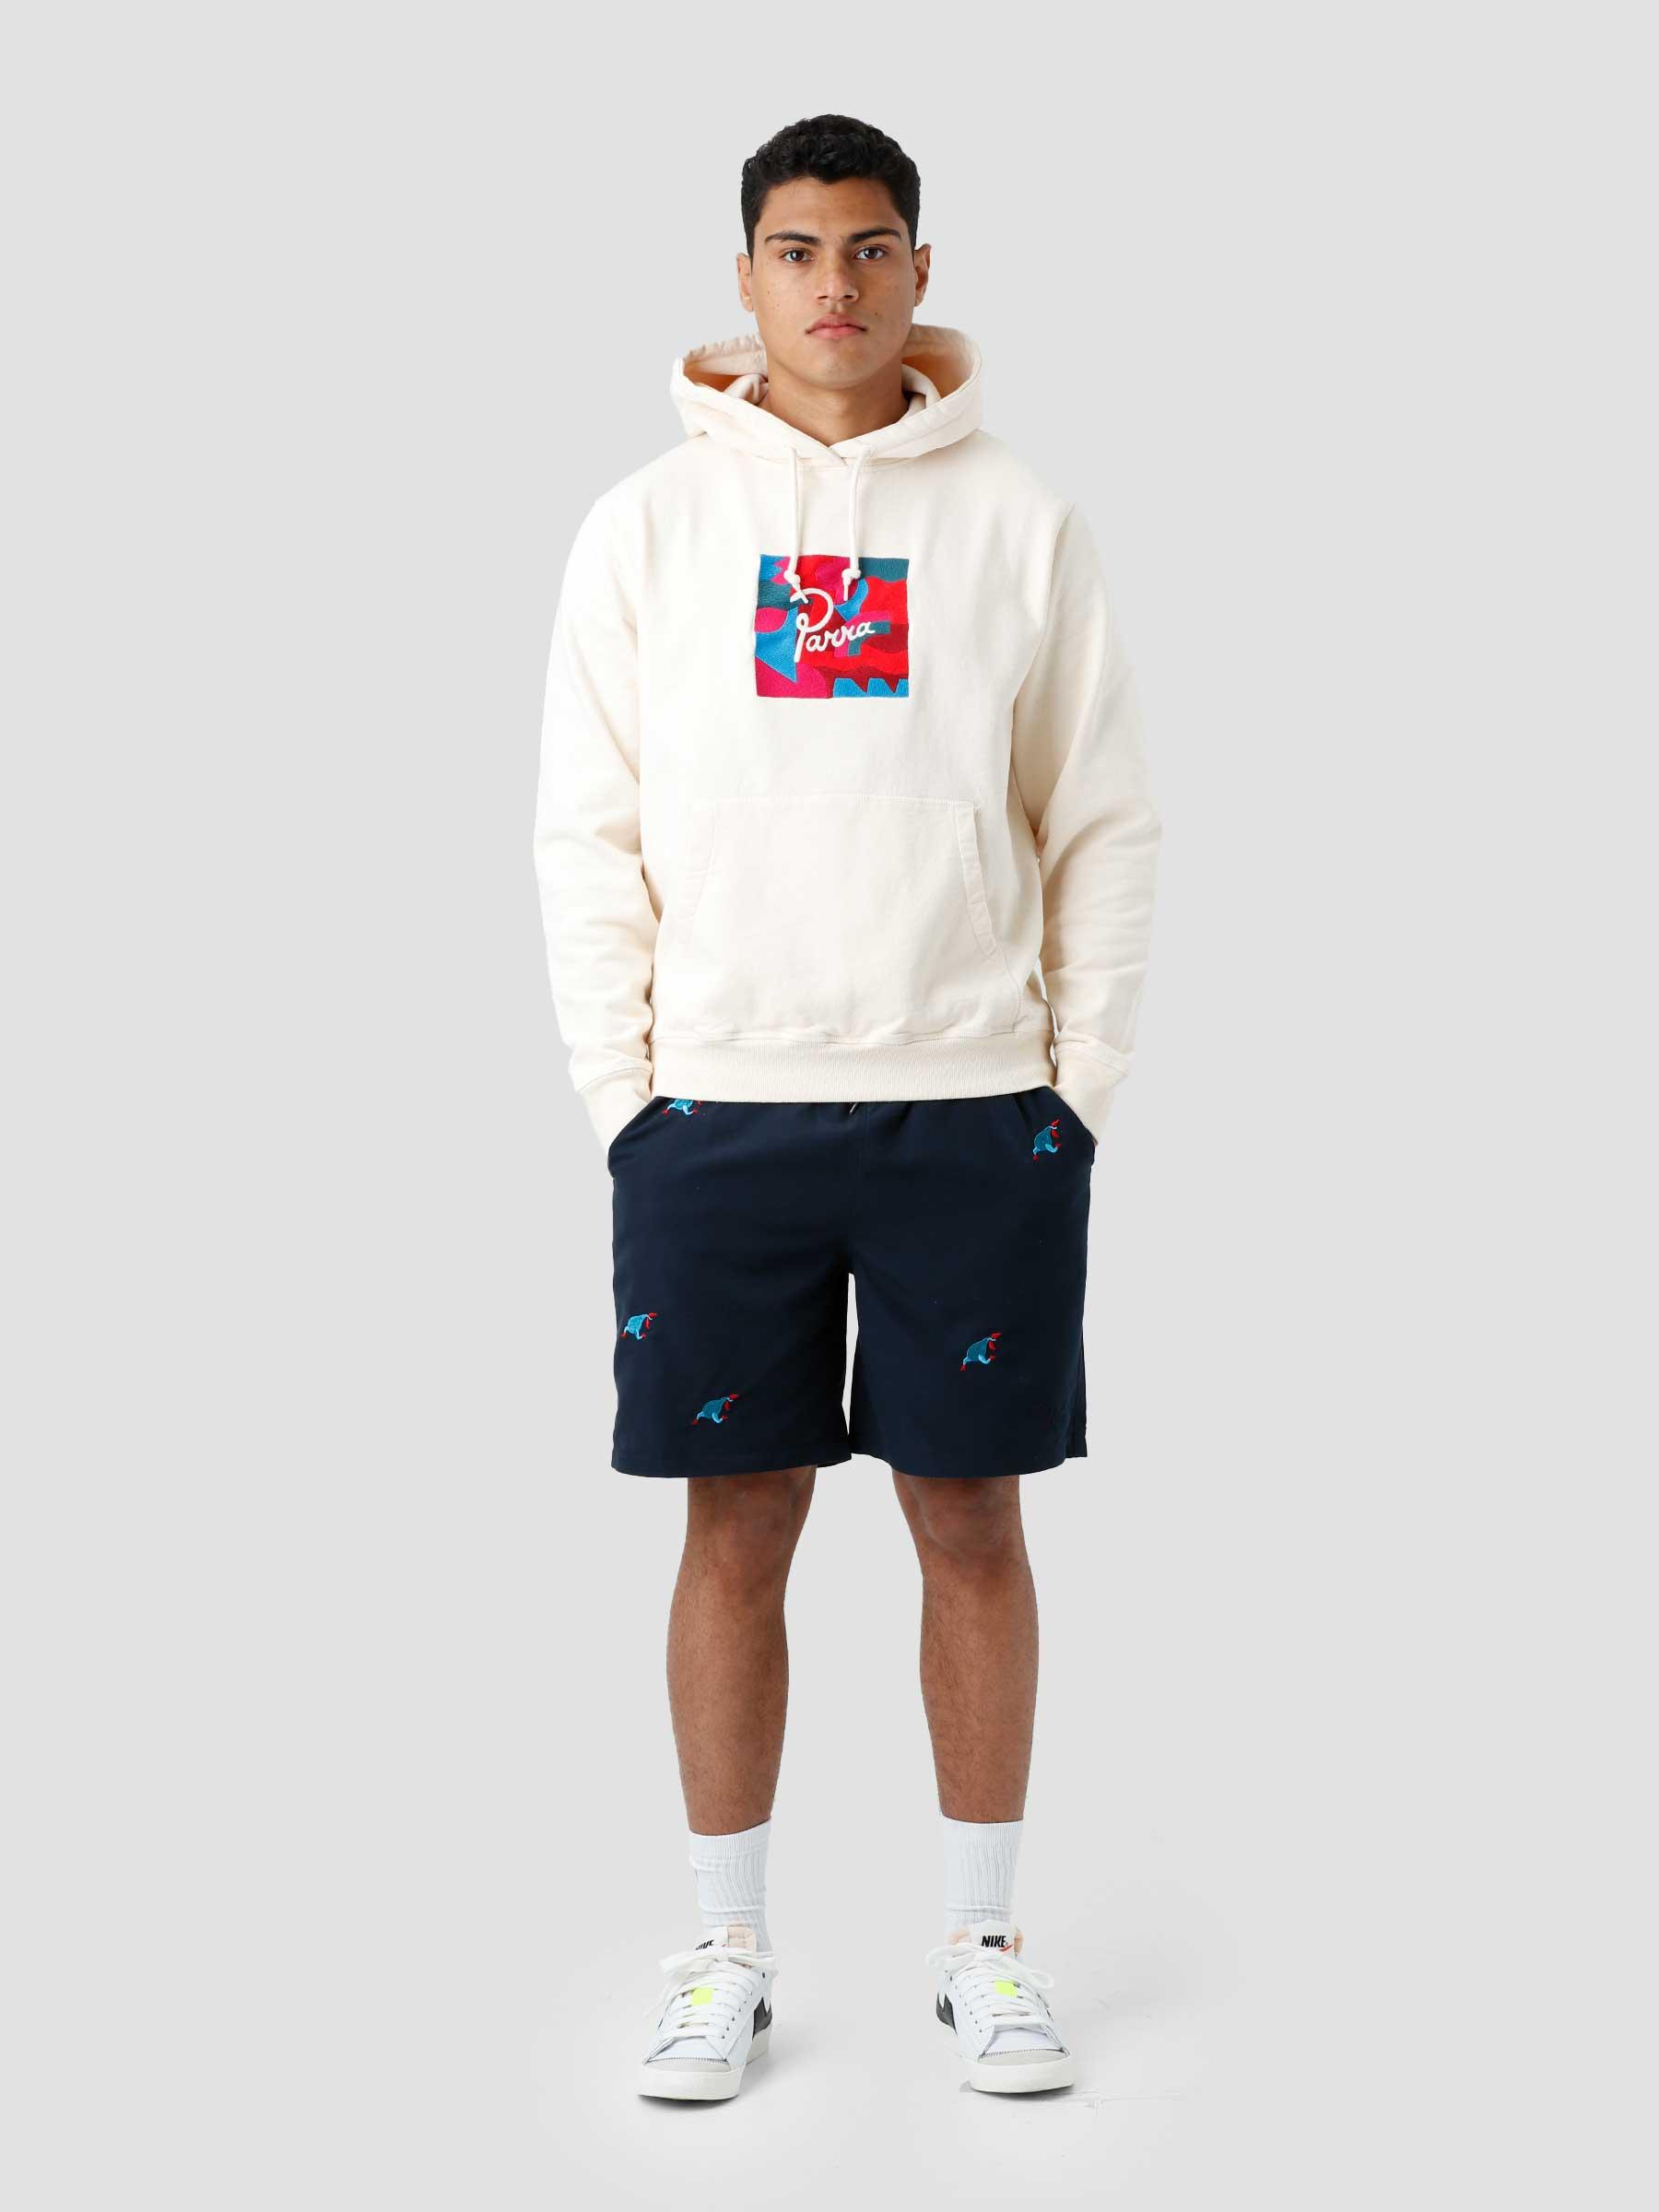 Abstract Shapes Hooded Sweatshirt White 47425